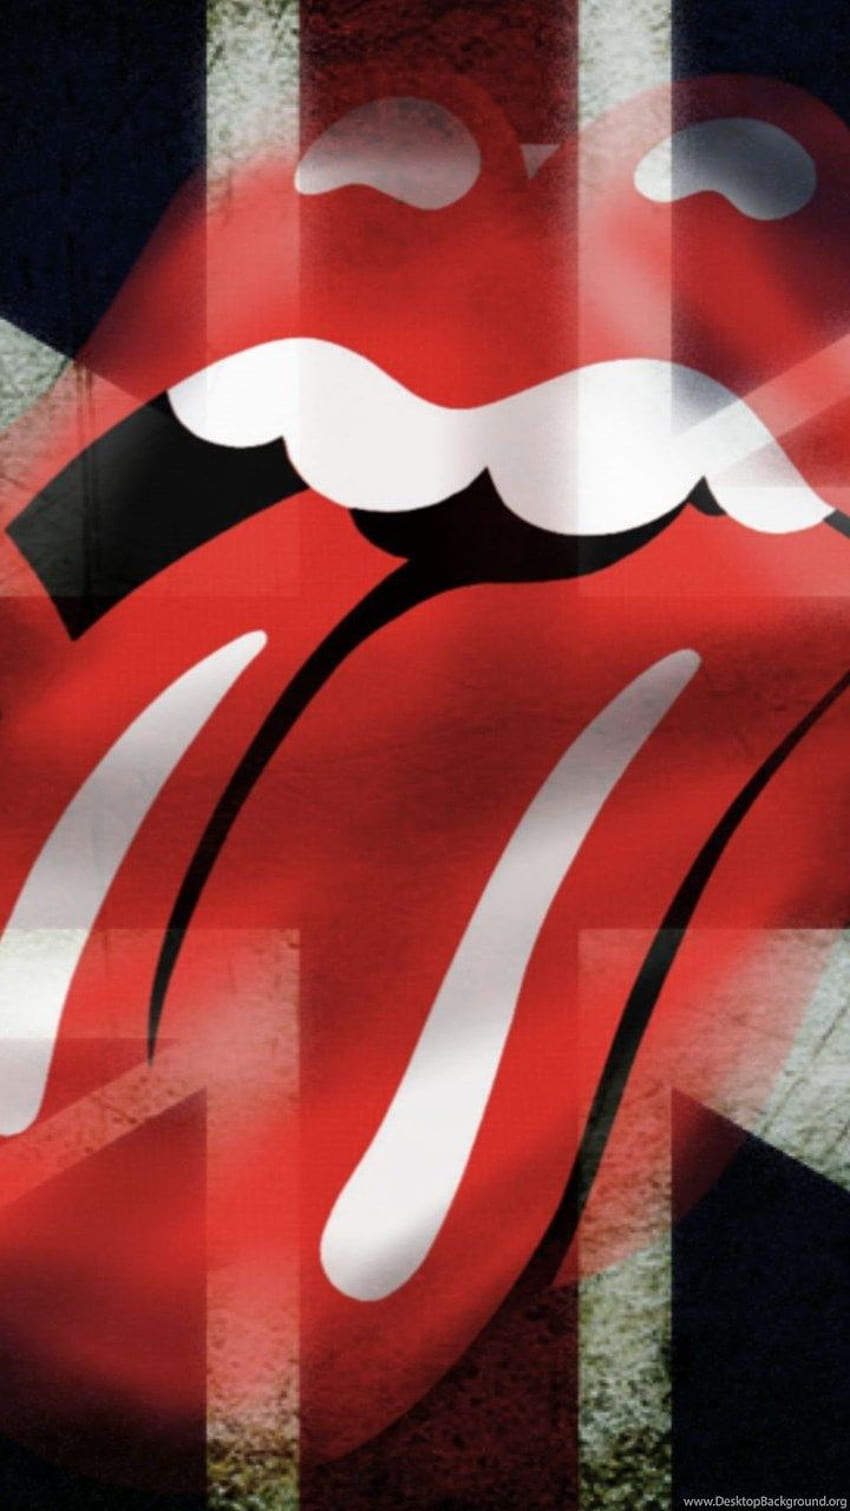 Sumber Poster The Rolling Stones - Rolling Stones - & Background wallpaper ponsel HD